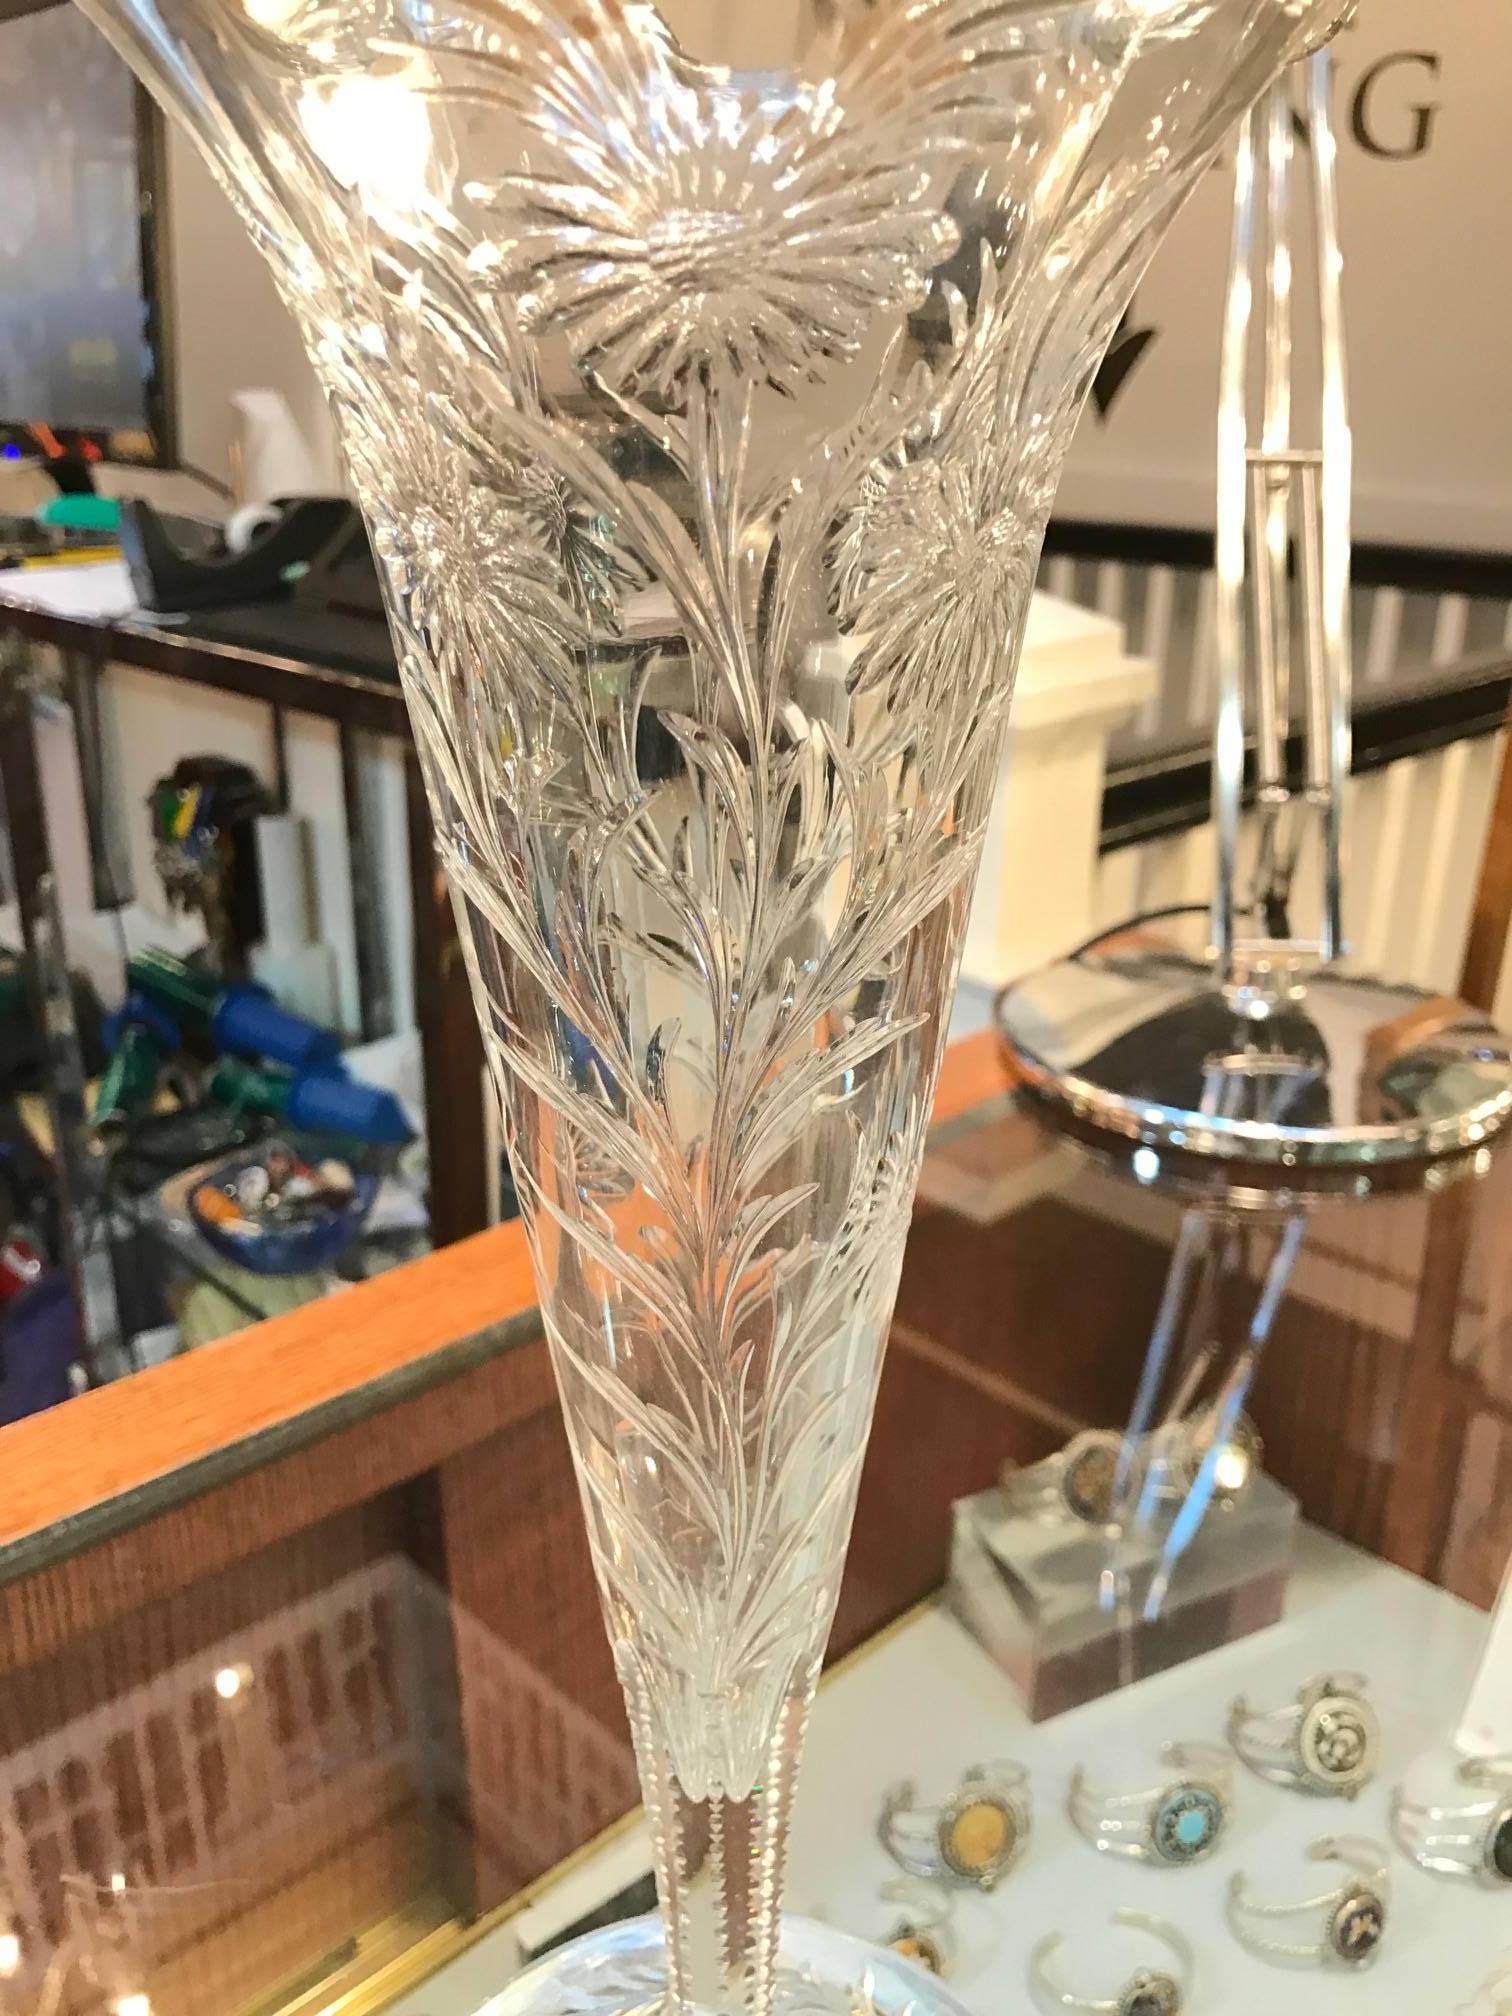 Elegant and formal intaglio cut-glass trumpet vase made by H. P. Sinclaire of New York. The handblown body is richly engraved with Art Nouveau style floral and leaf patters on the body and base. This pieces is signed with a very small acid stamp